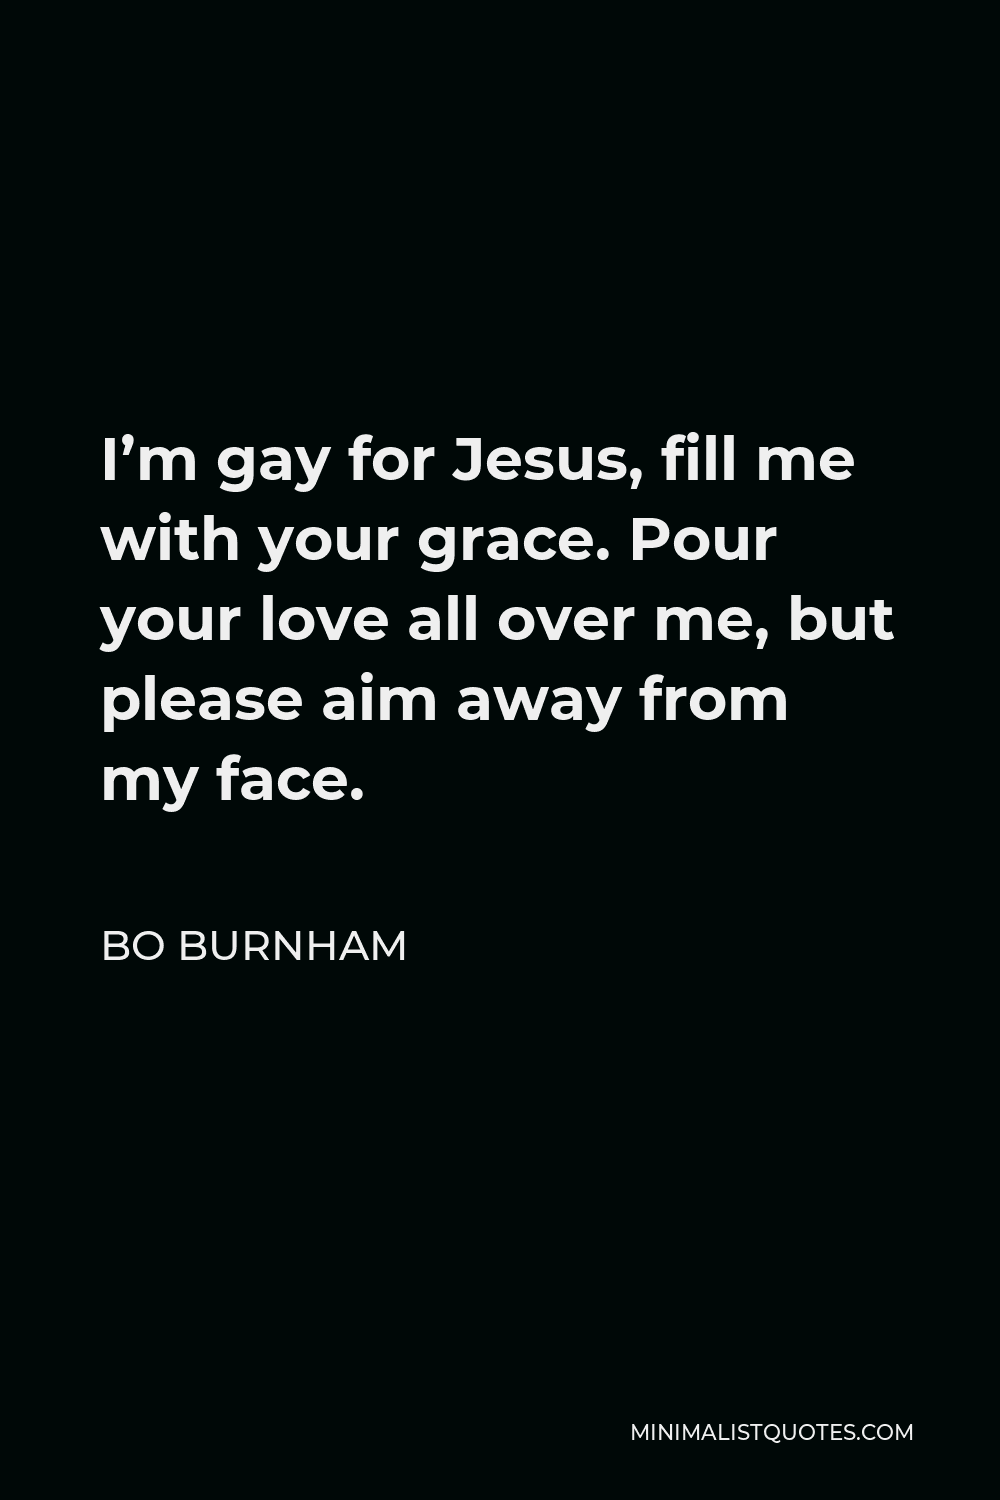 Bo Burnham Quote - I’m gay for Jesus, fill me with your grace. Pour your love all over me, but please aim away from my face.